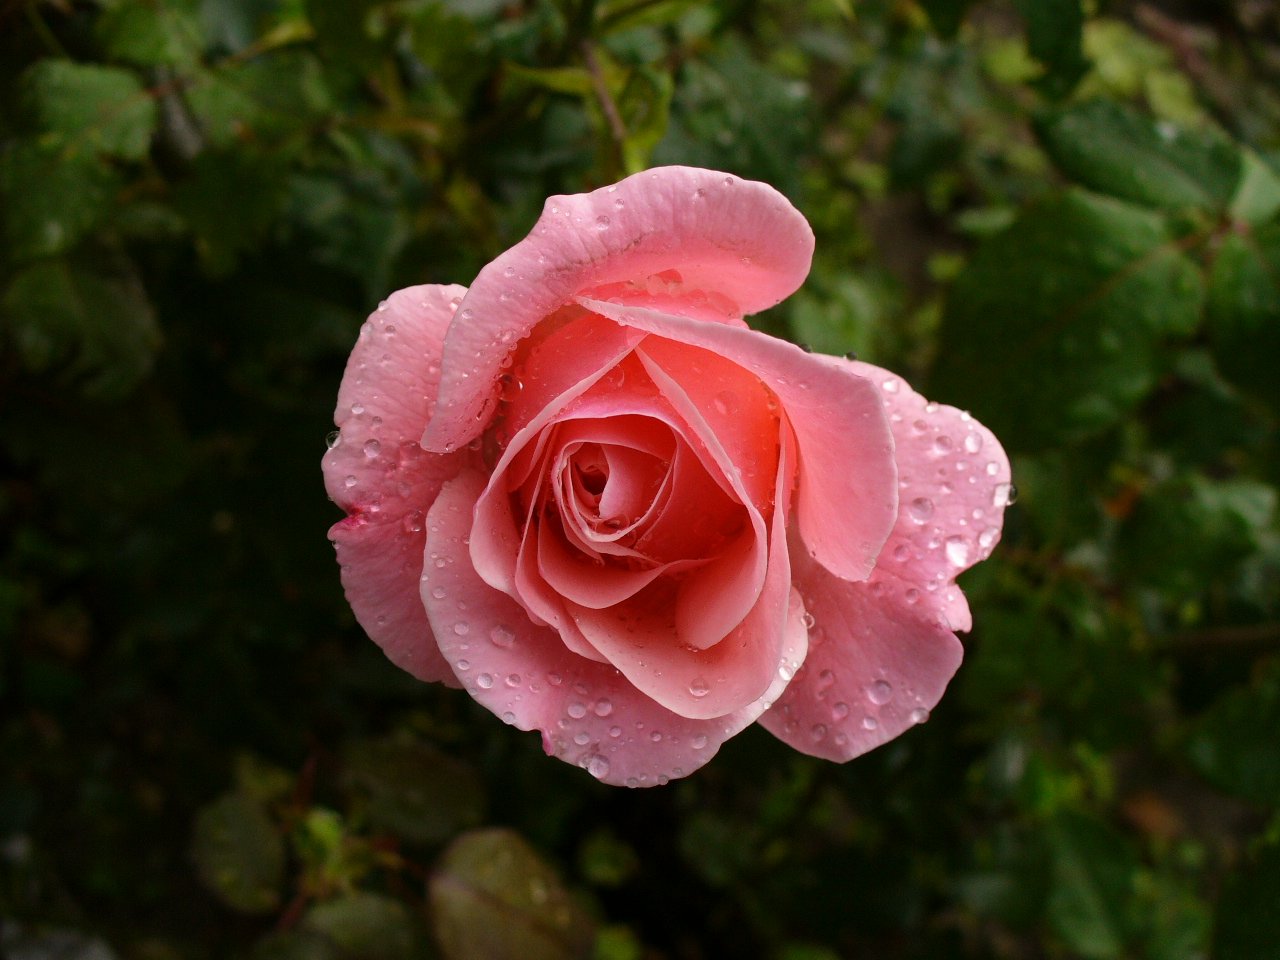 the large rose is pink with droplets of water on it